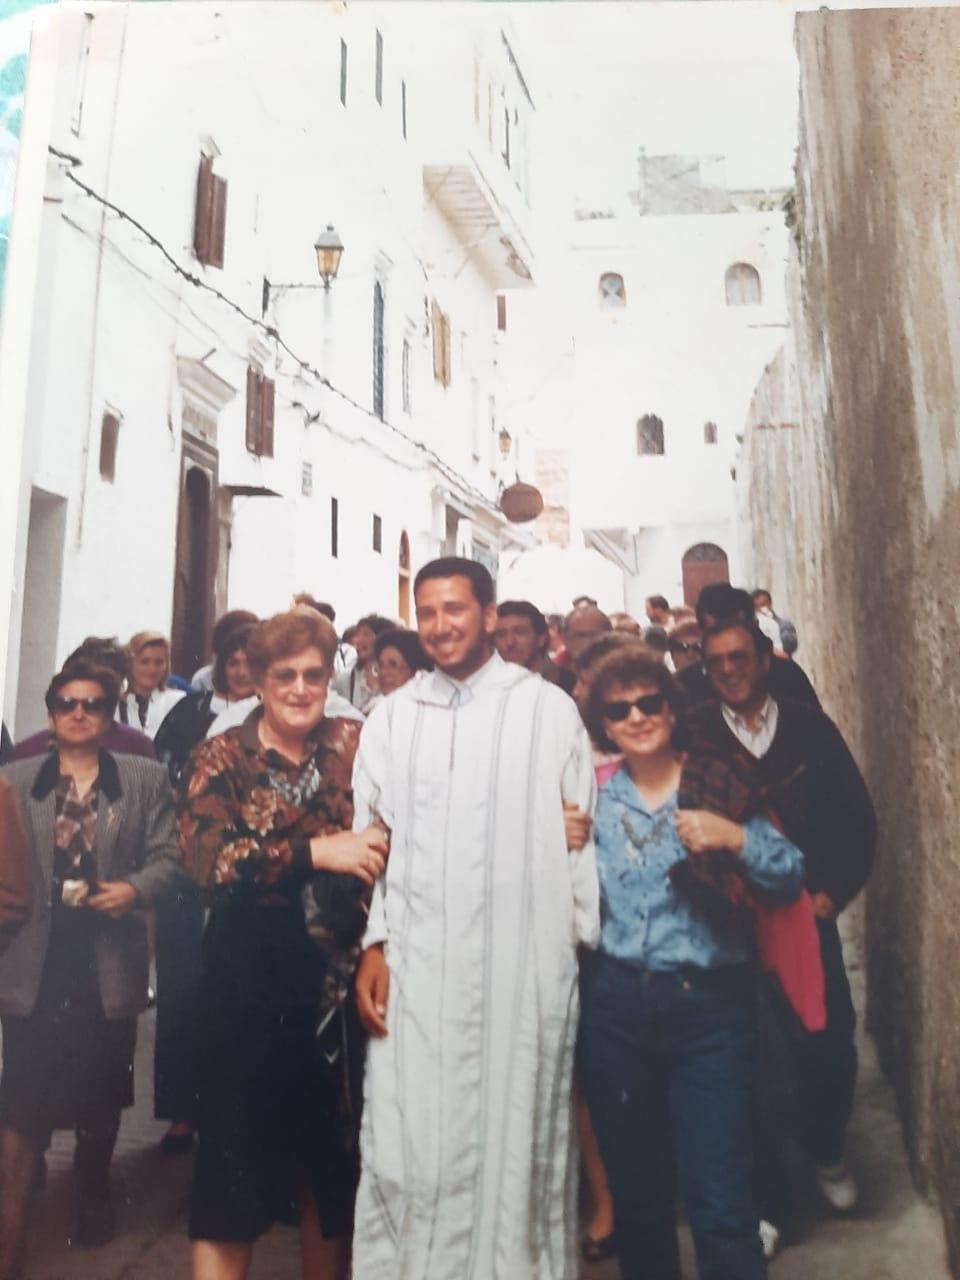 Gallery - Abdul in the old days - Kasbah, tour of Tangier